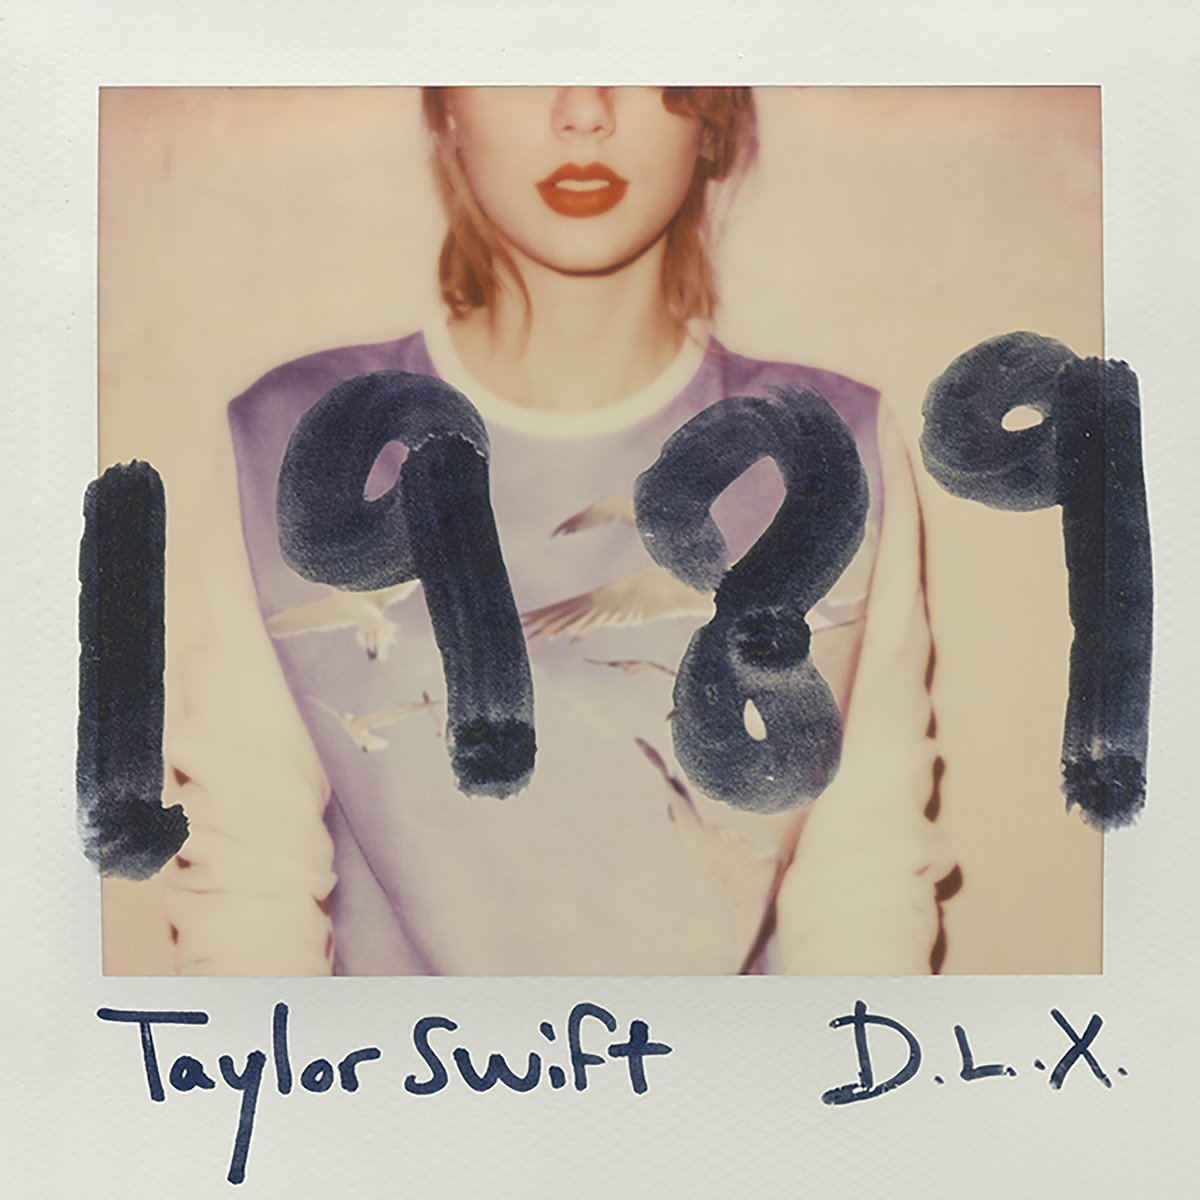 Cover of Taylor Swift's 1989 album